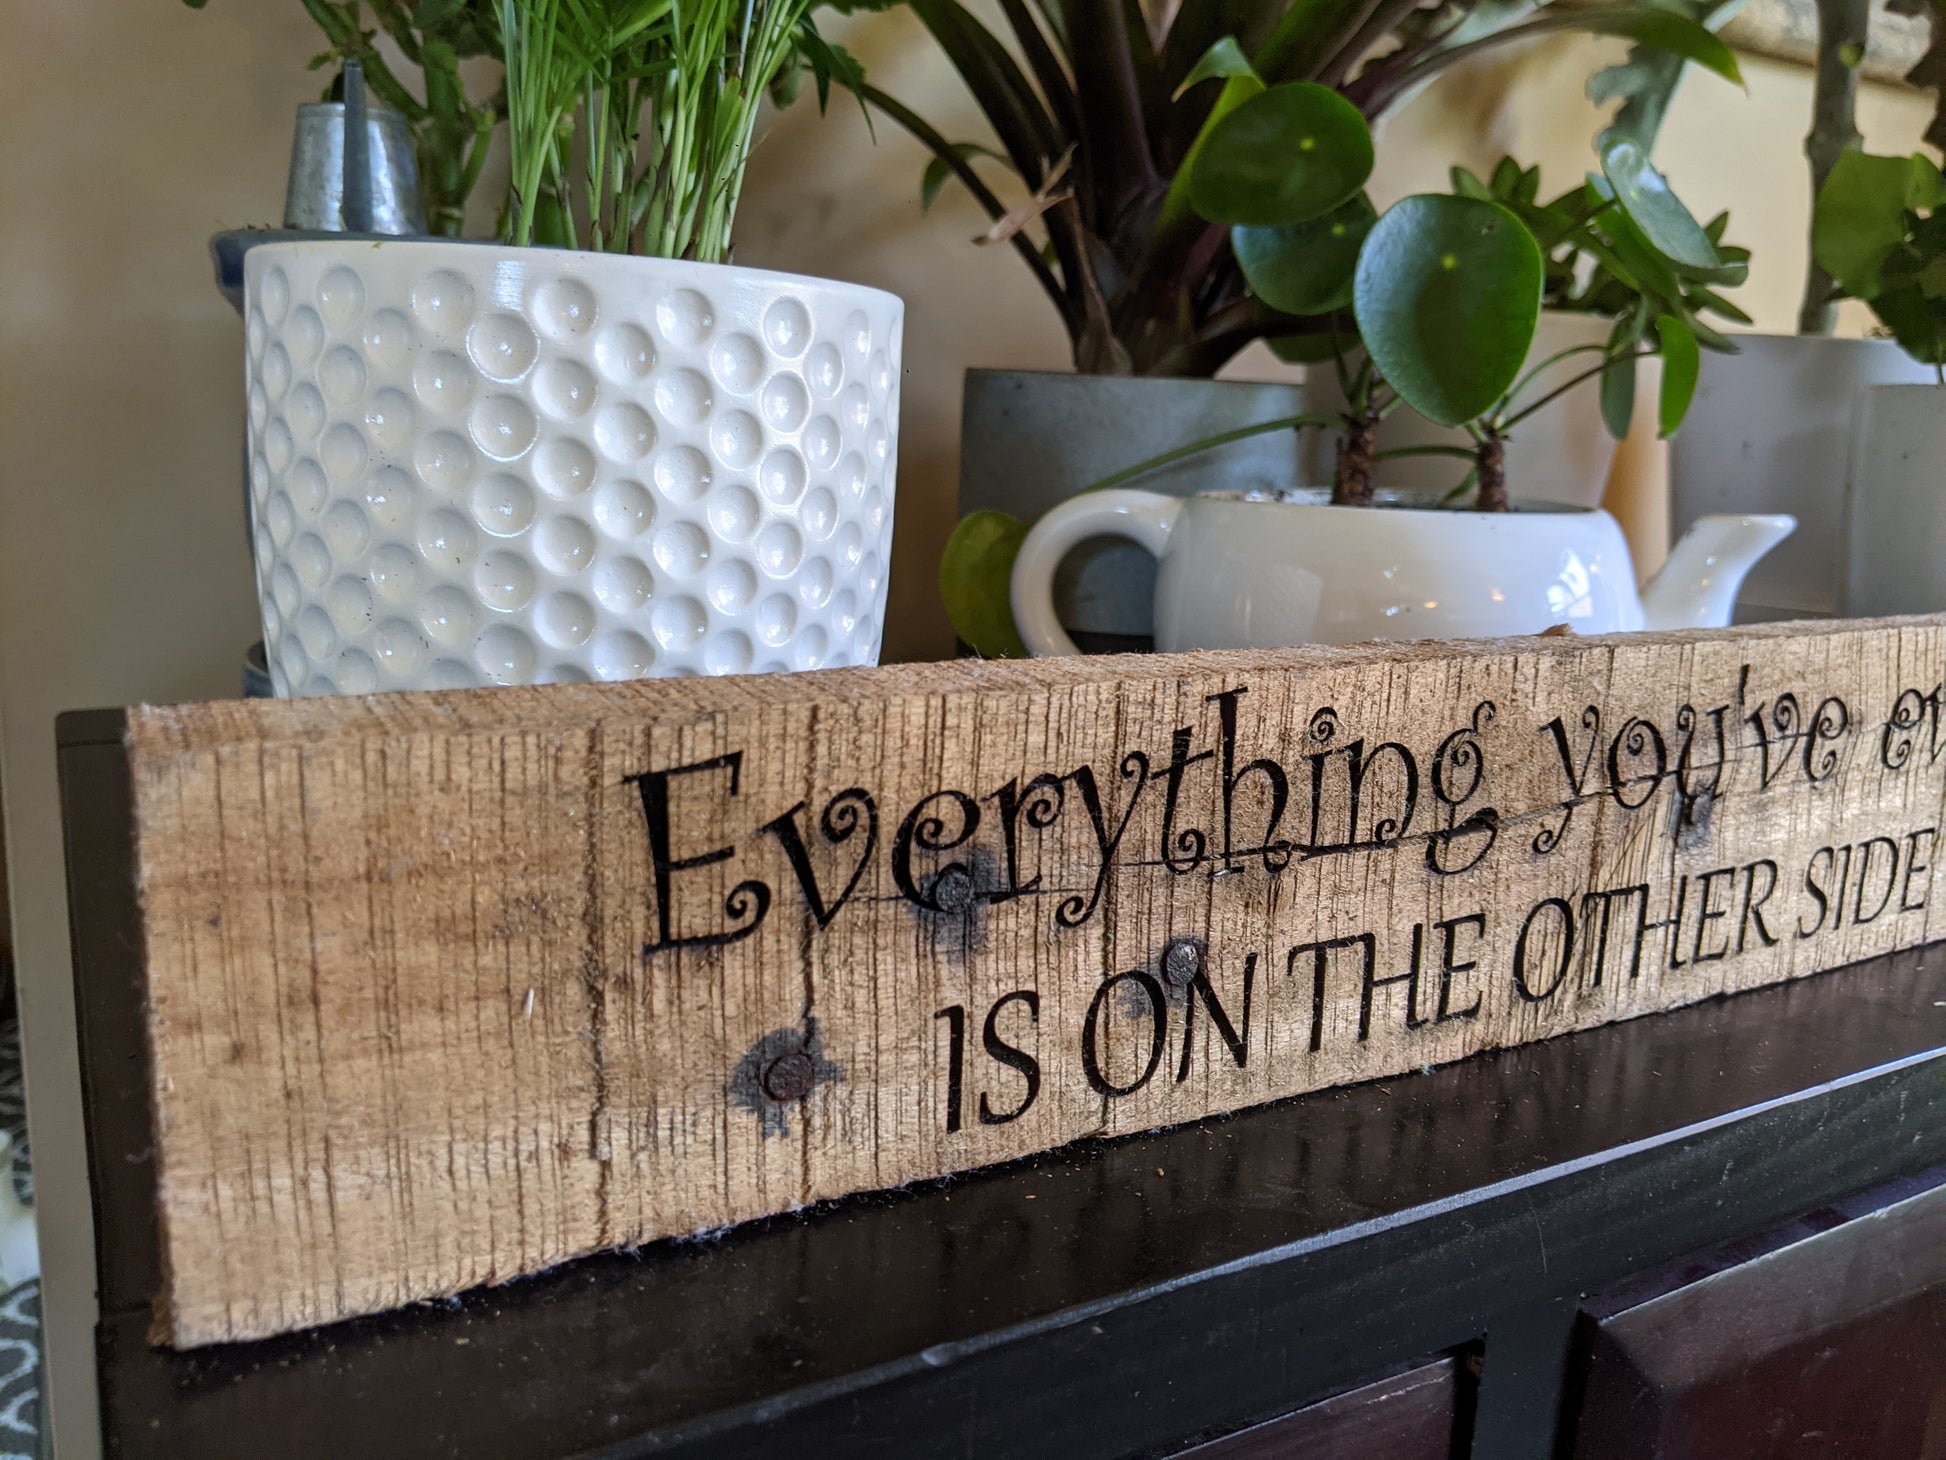 Other side of fear quote wood sign